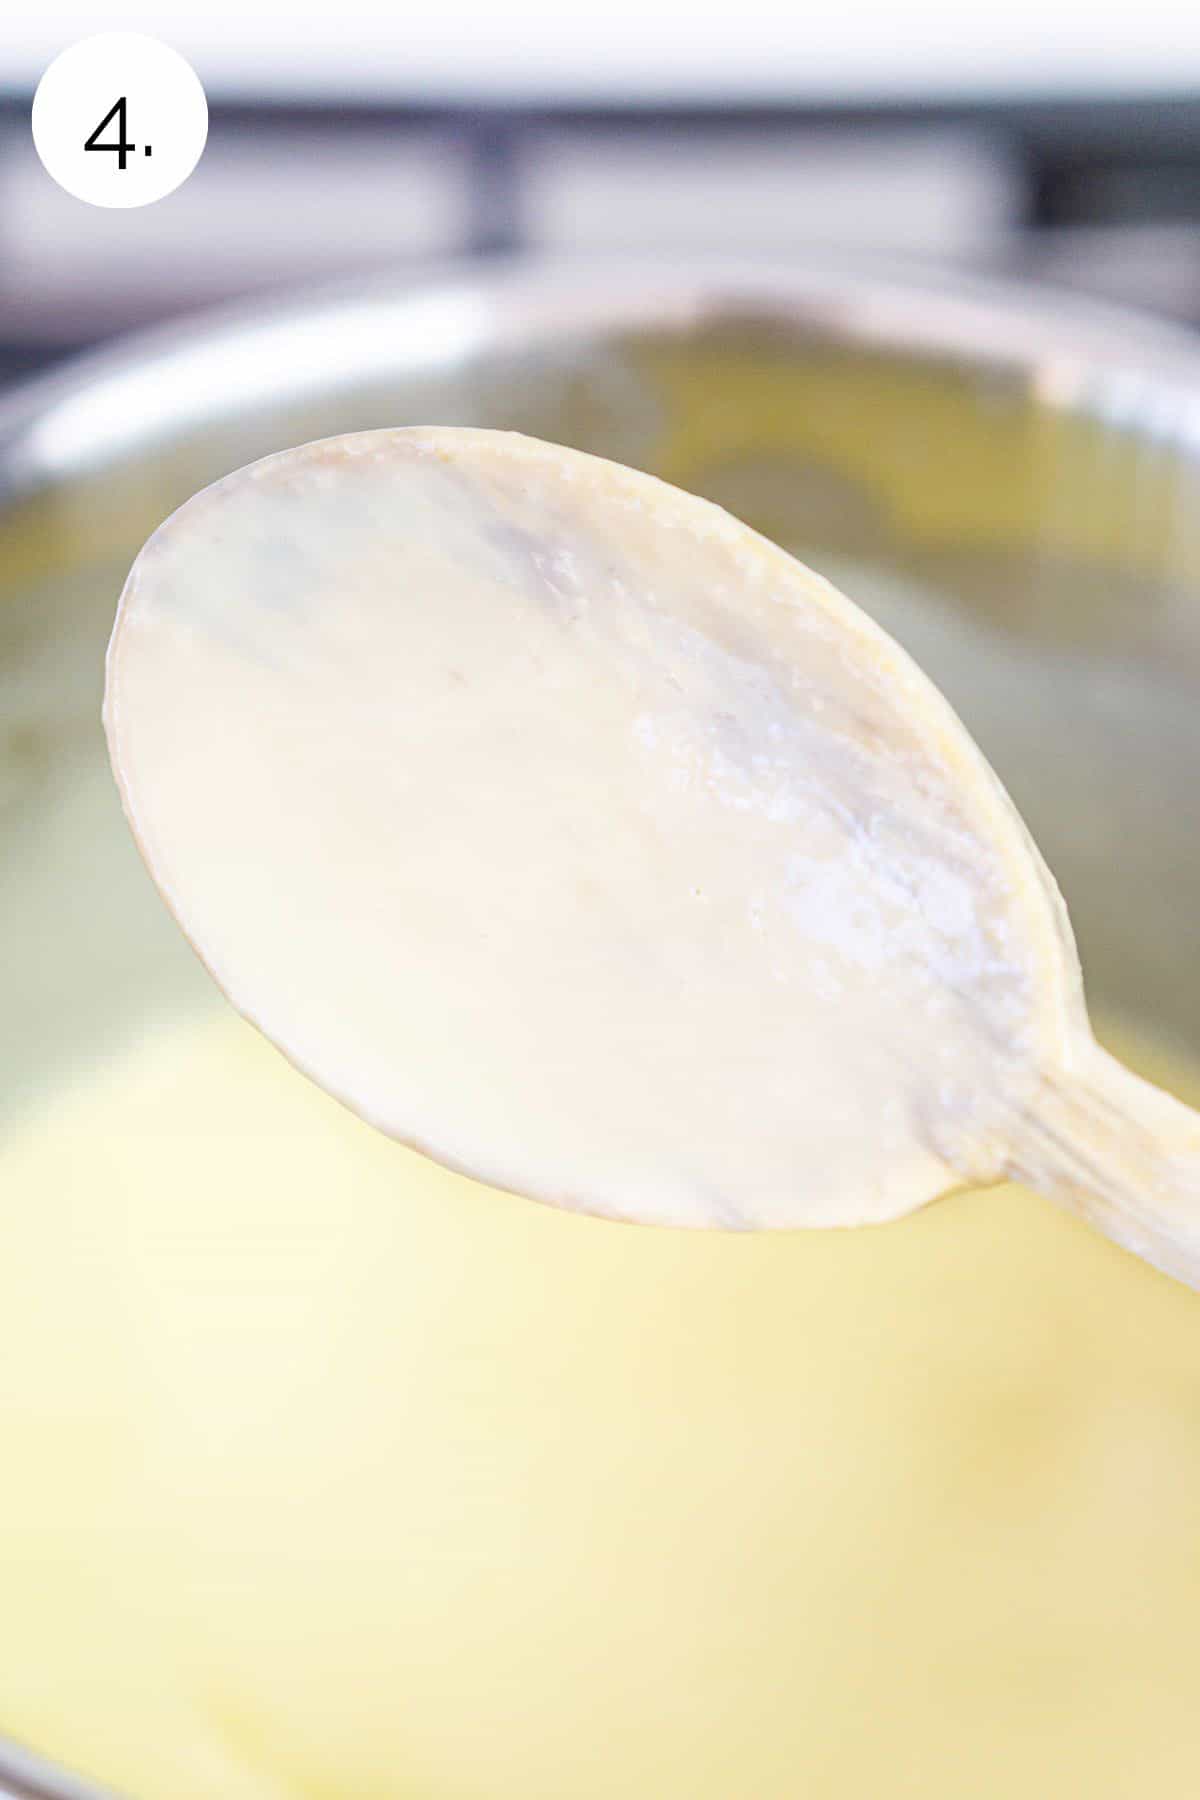 The custard mixture covering a wooden spoon after thickening in a stainless steel saucepan on the stove.